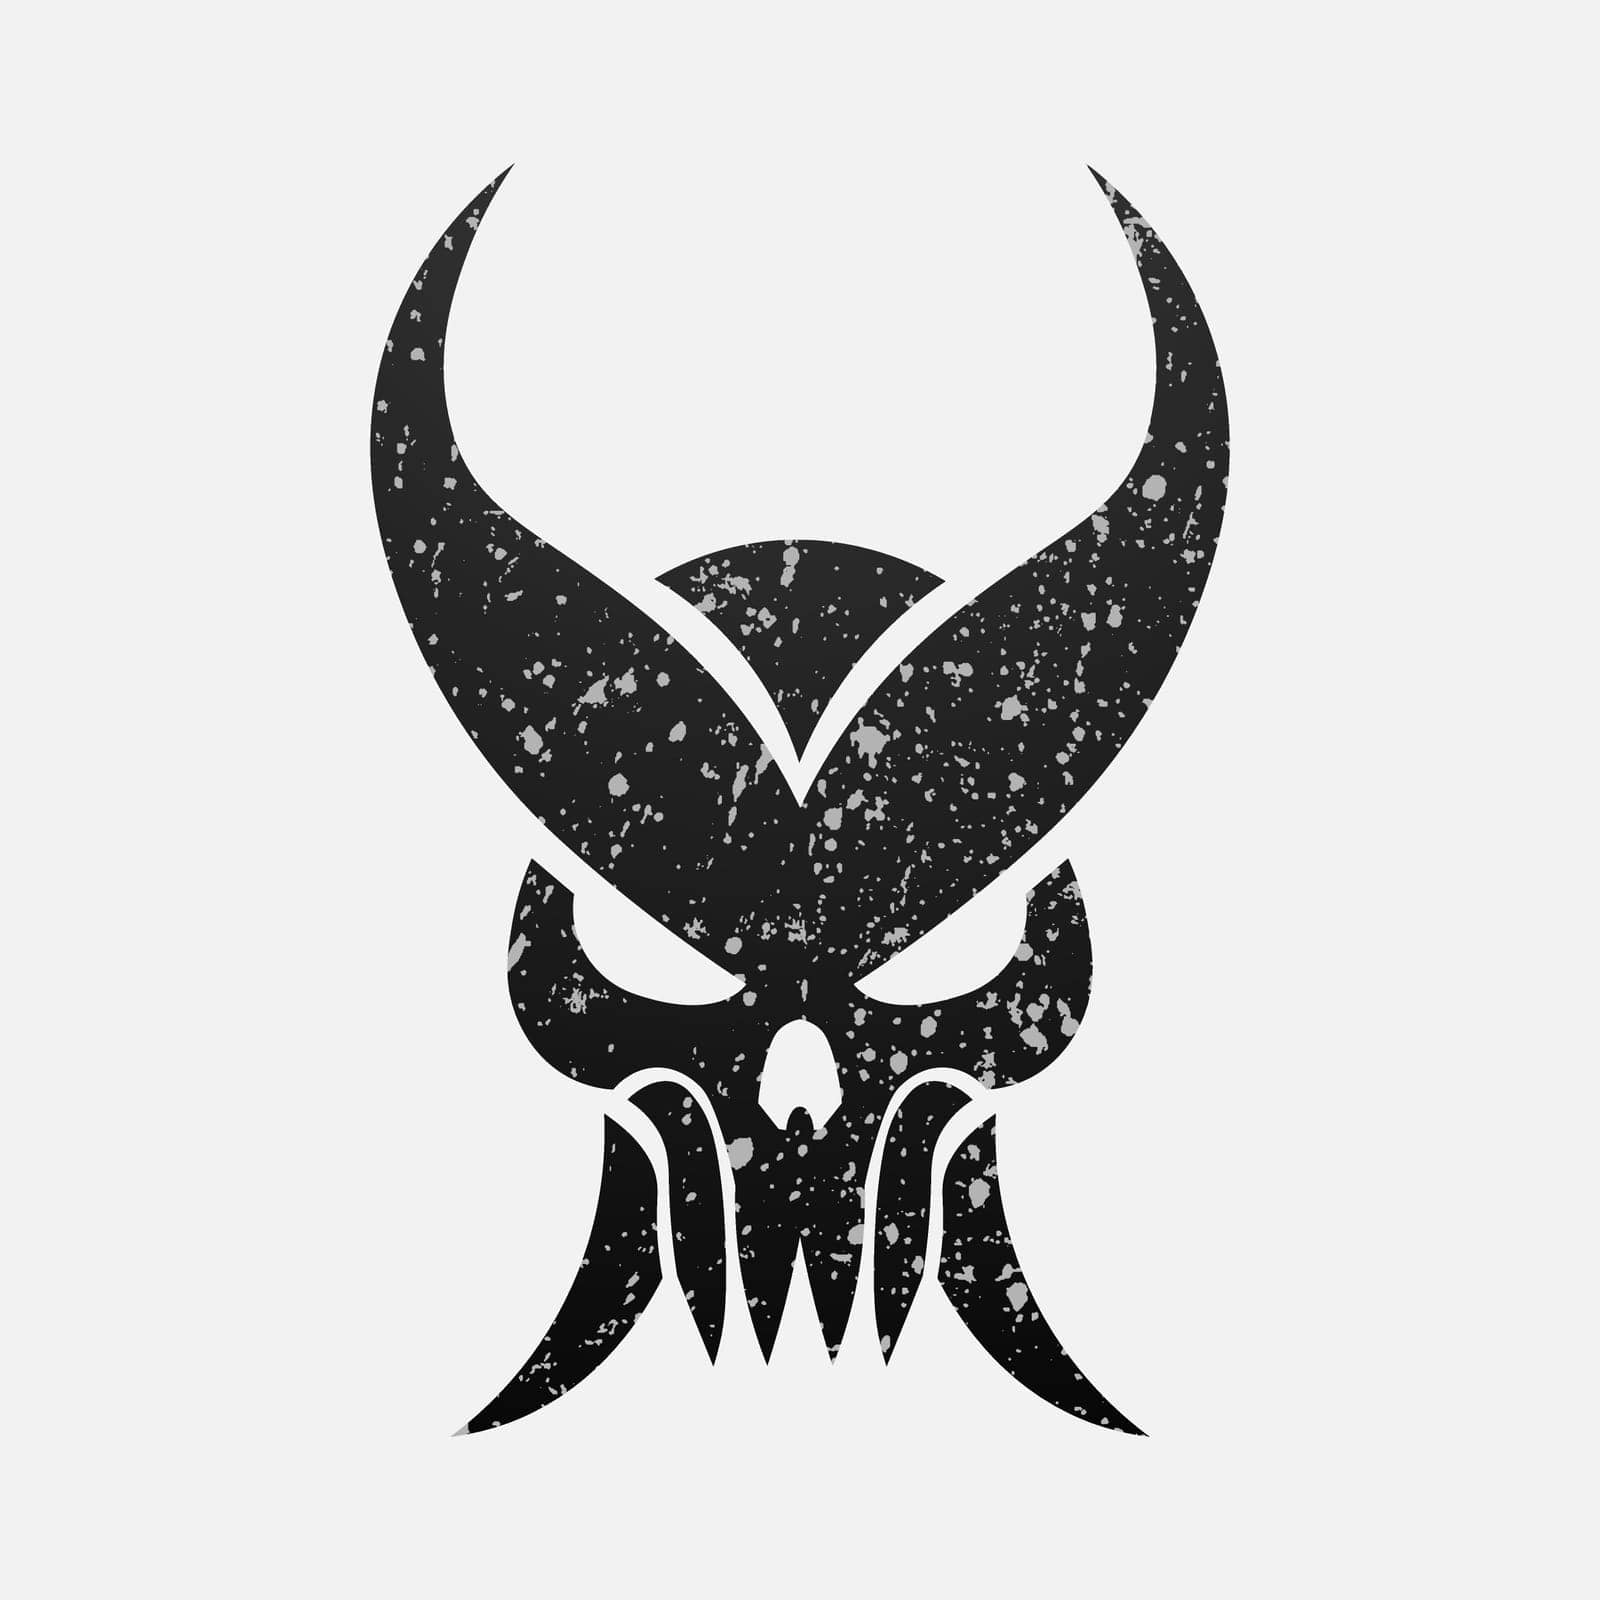 Skull of punisher fist of the beast. Element of crime and punishment style illustration, t-Shirt graphics design famous, vector design icon.